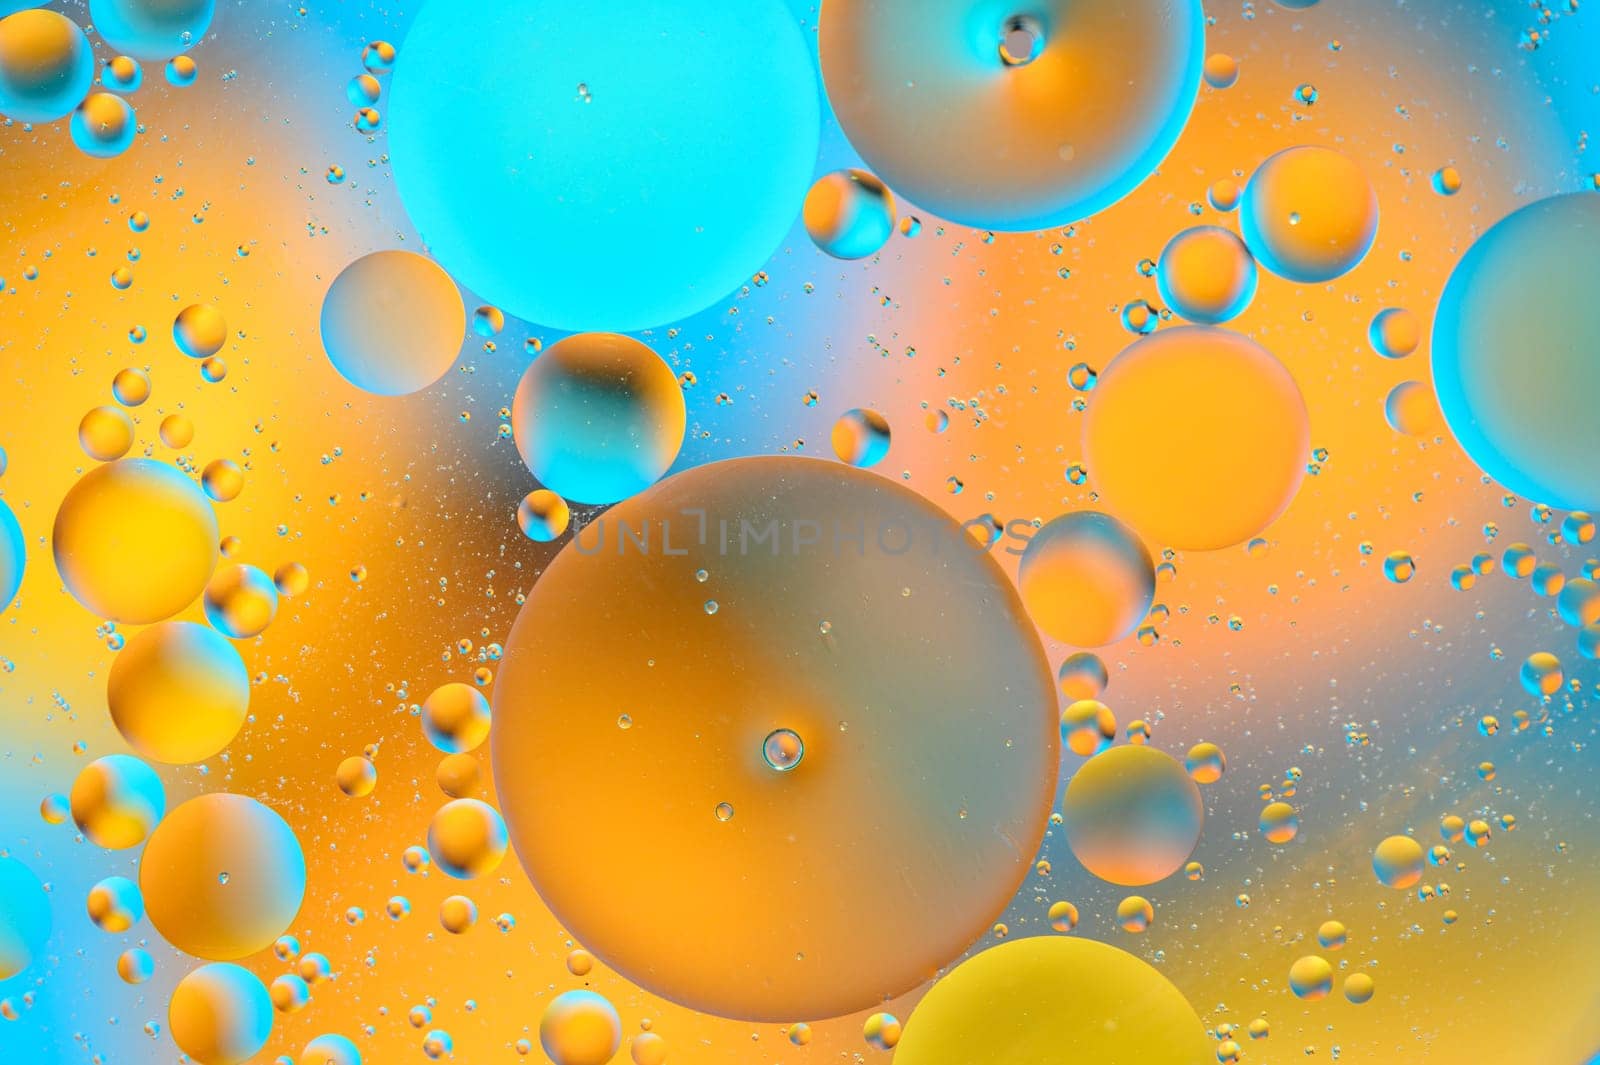 abstract background of multi-colored spots and circles microcosm universe galaxy 14